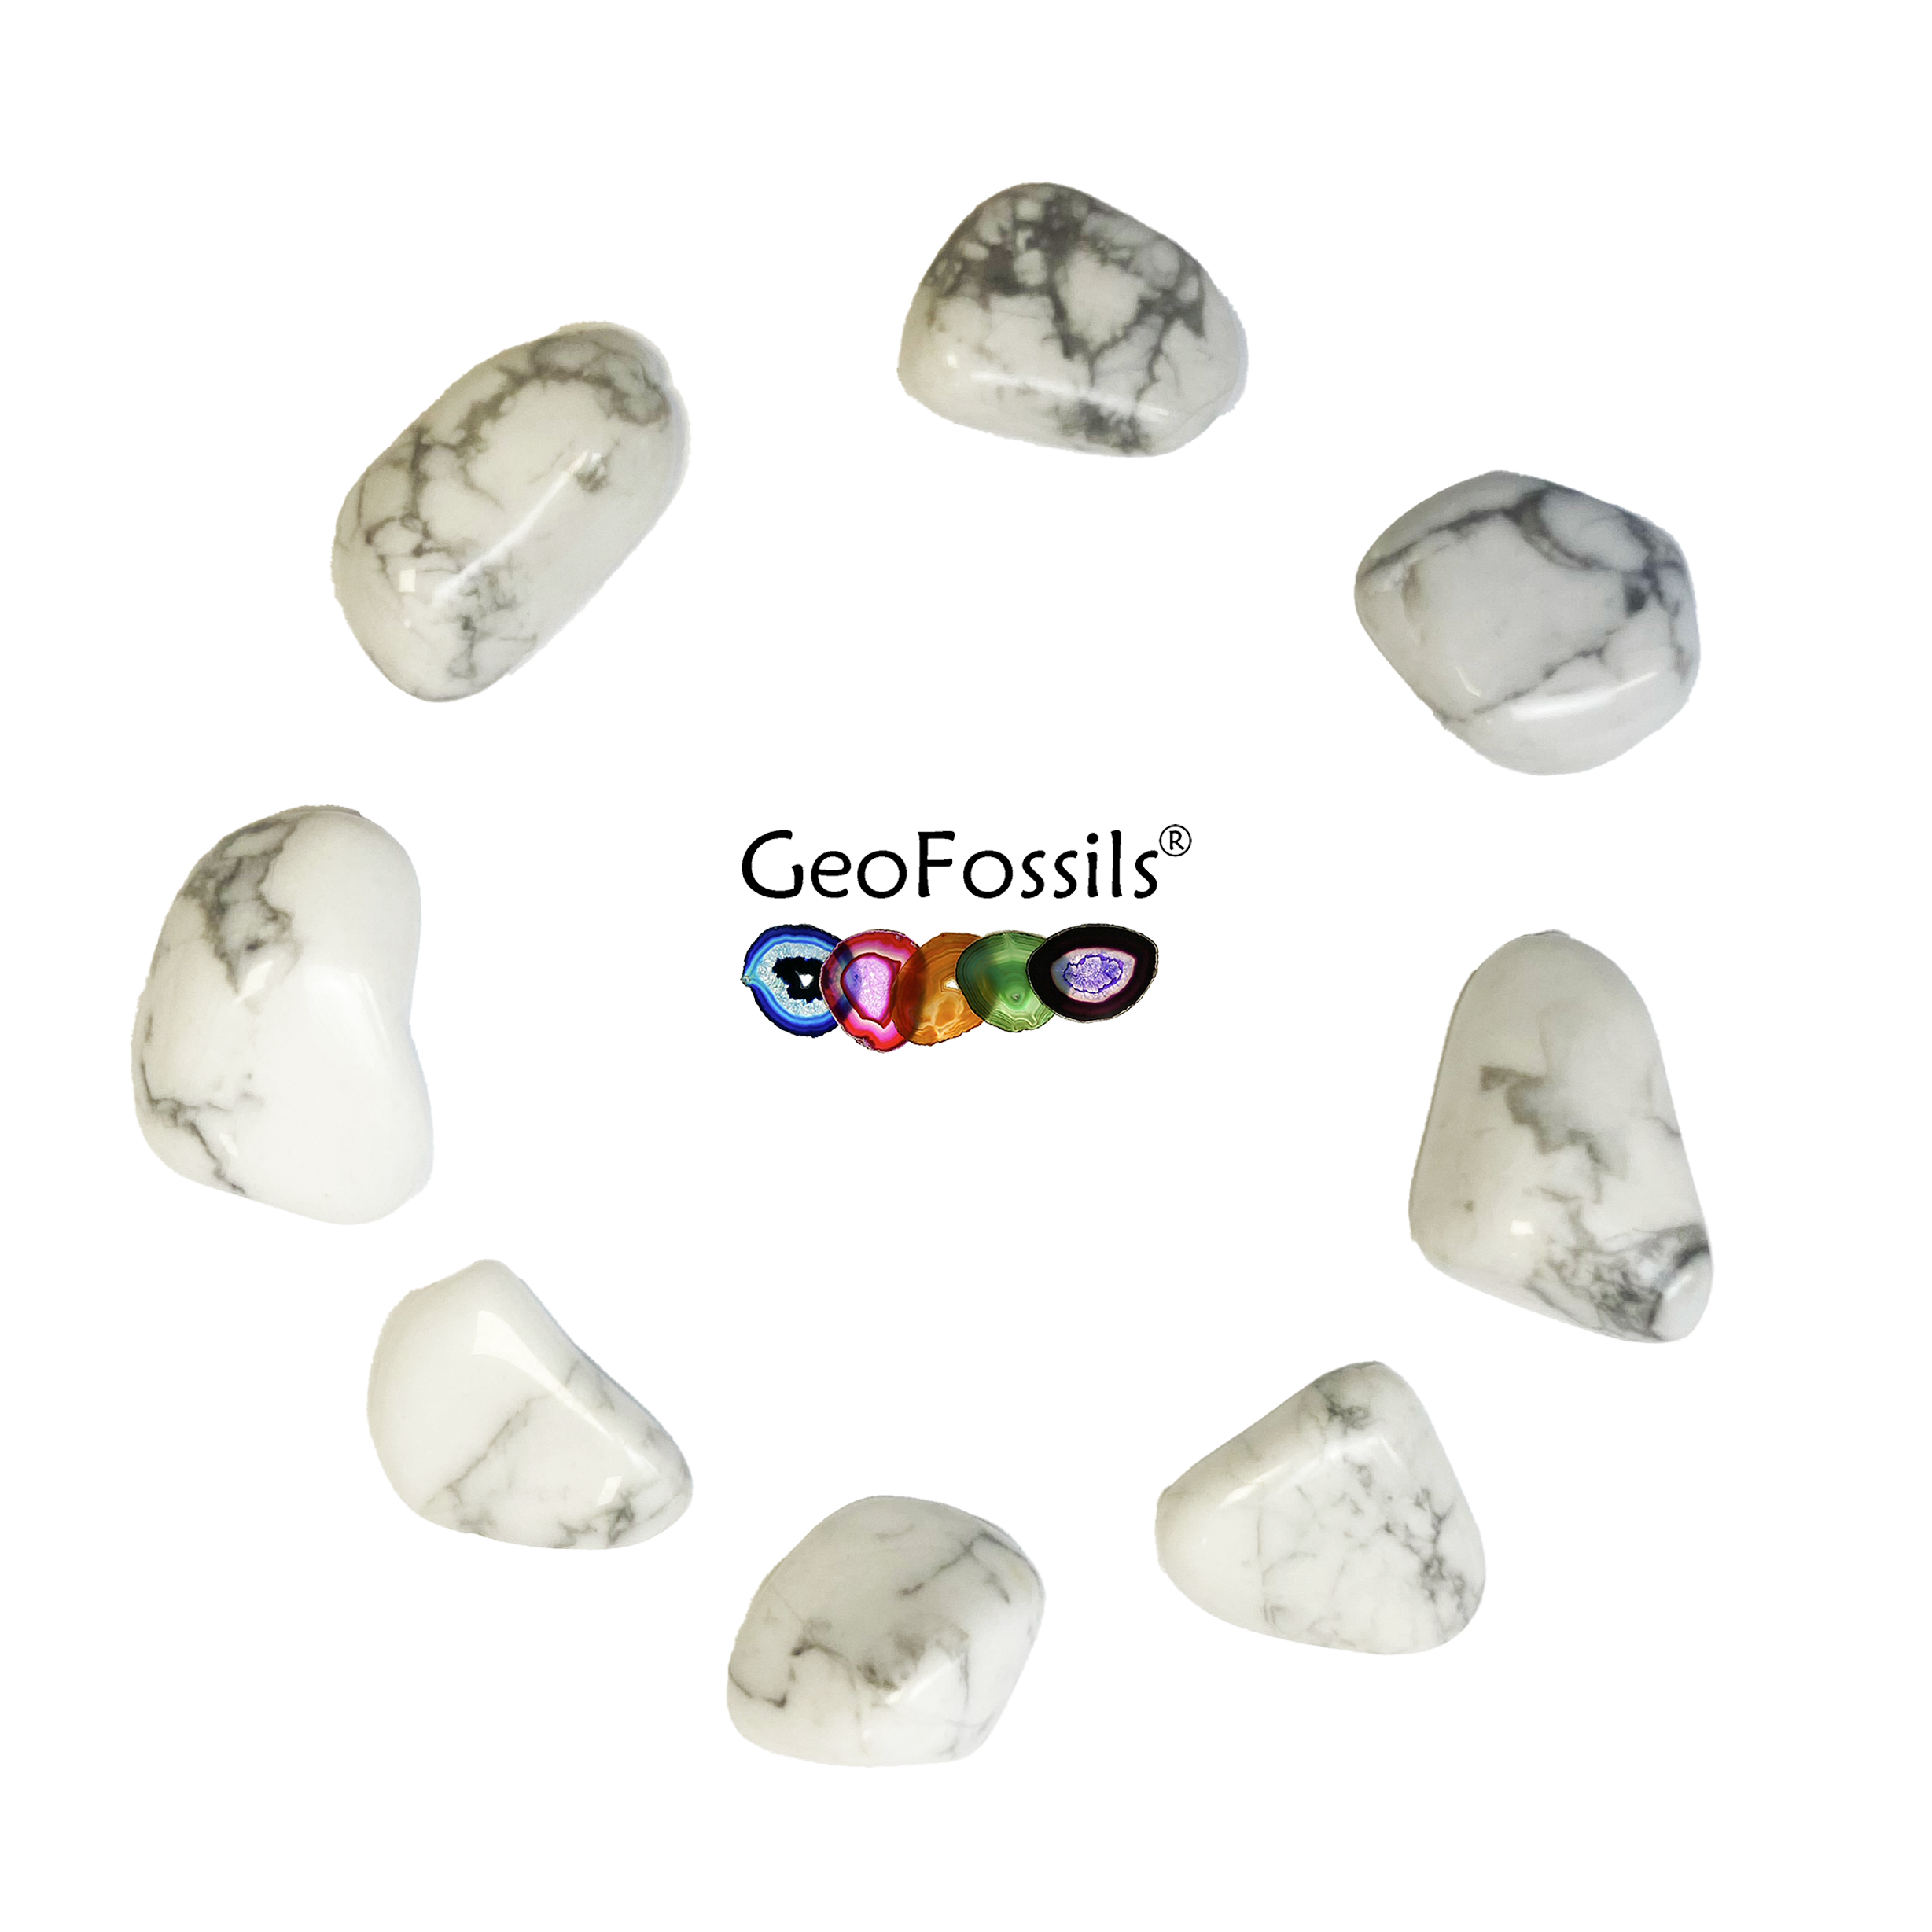 Geofossils Howlite Polished Healing Crystals Tumble Stone